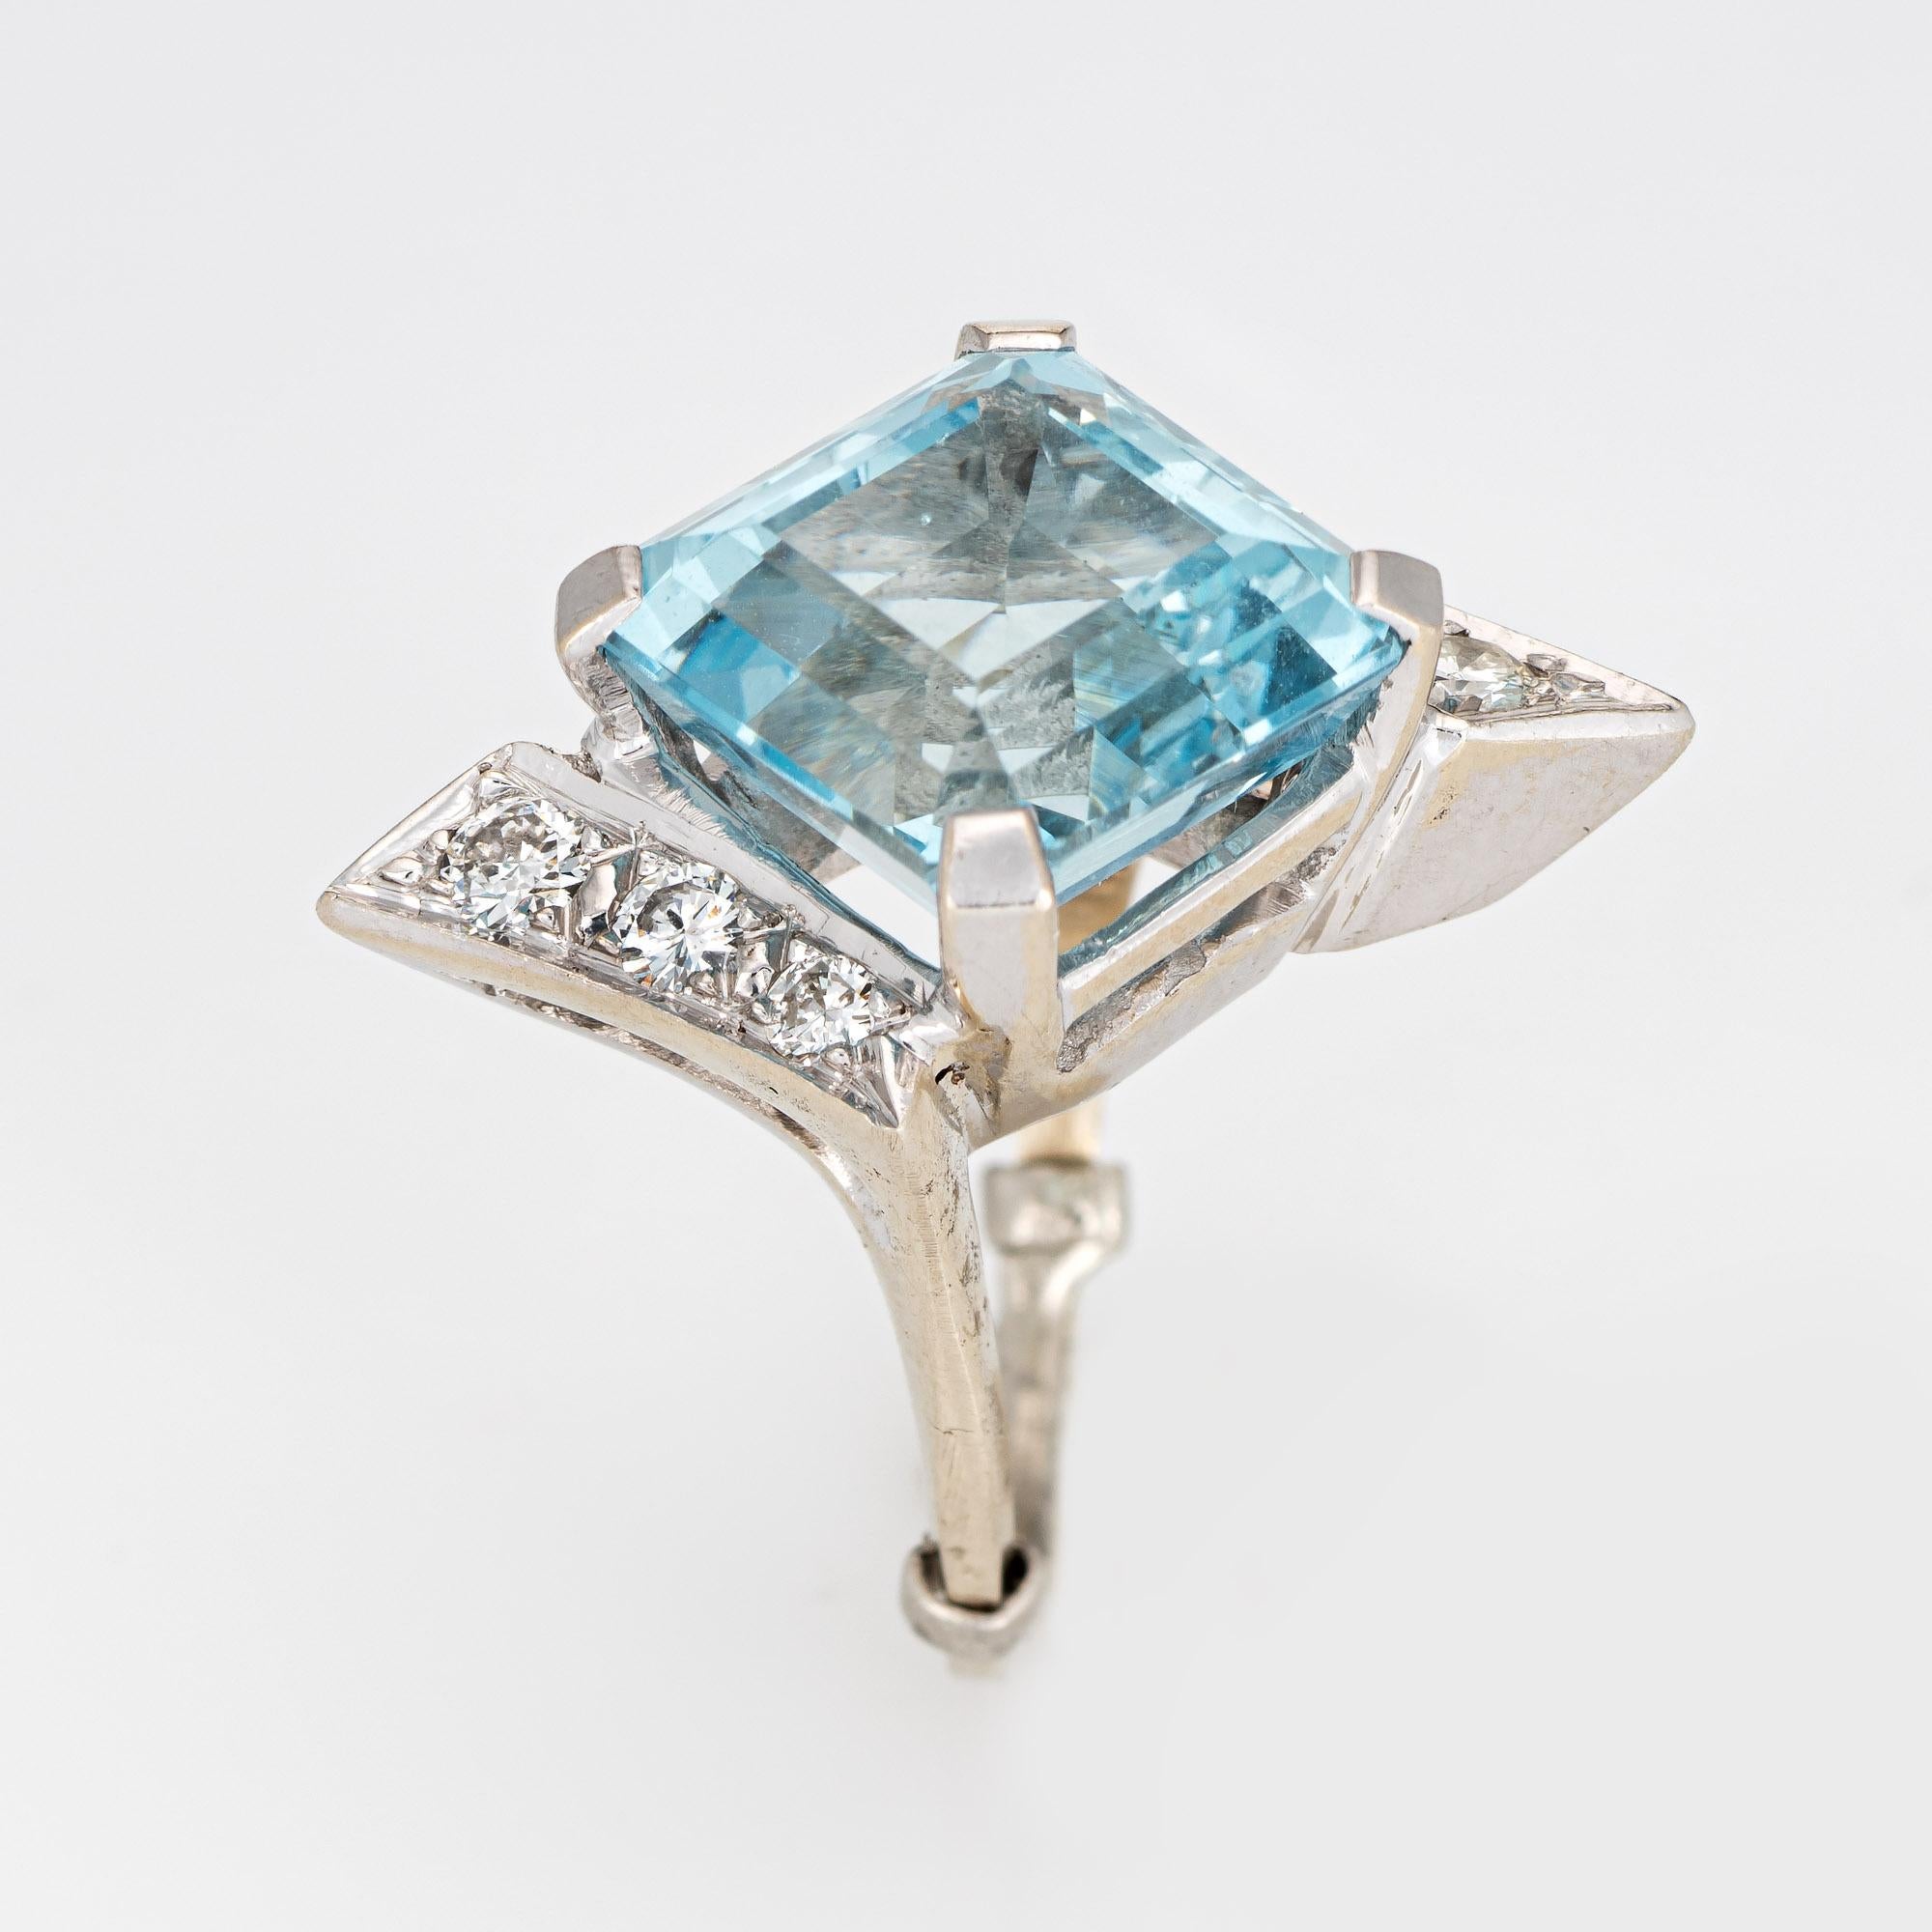 Stylish vintage aquamarine & diamond cocktail ring (circa 1960s) crafted in 14 karat white gold. 

Emerald cut aquamarine measures 12mm diameter (estimated at 10 carats), accented with an estimated 0.38 carats of diamonds (estimated at G-H color and